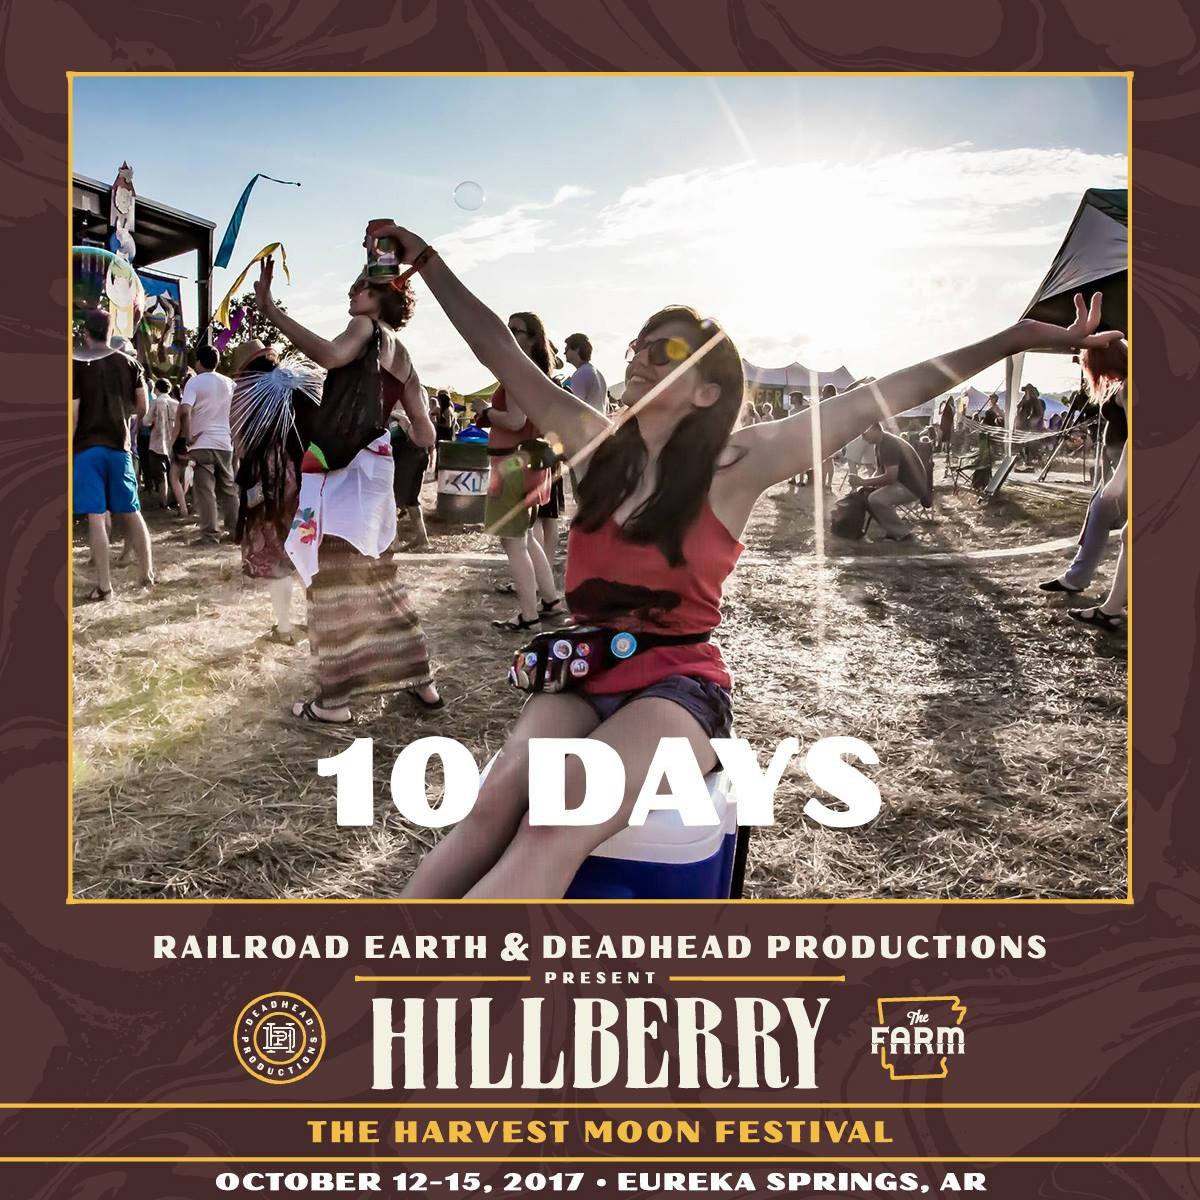 Fresh Ozark Mountain air is only 10 Days away! #Hillberry2017 will be here before you know it!! Photo Credit: @philclarkin #Ozarks #Arkansas